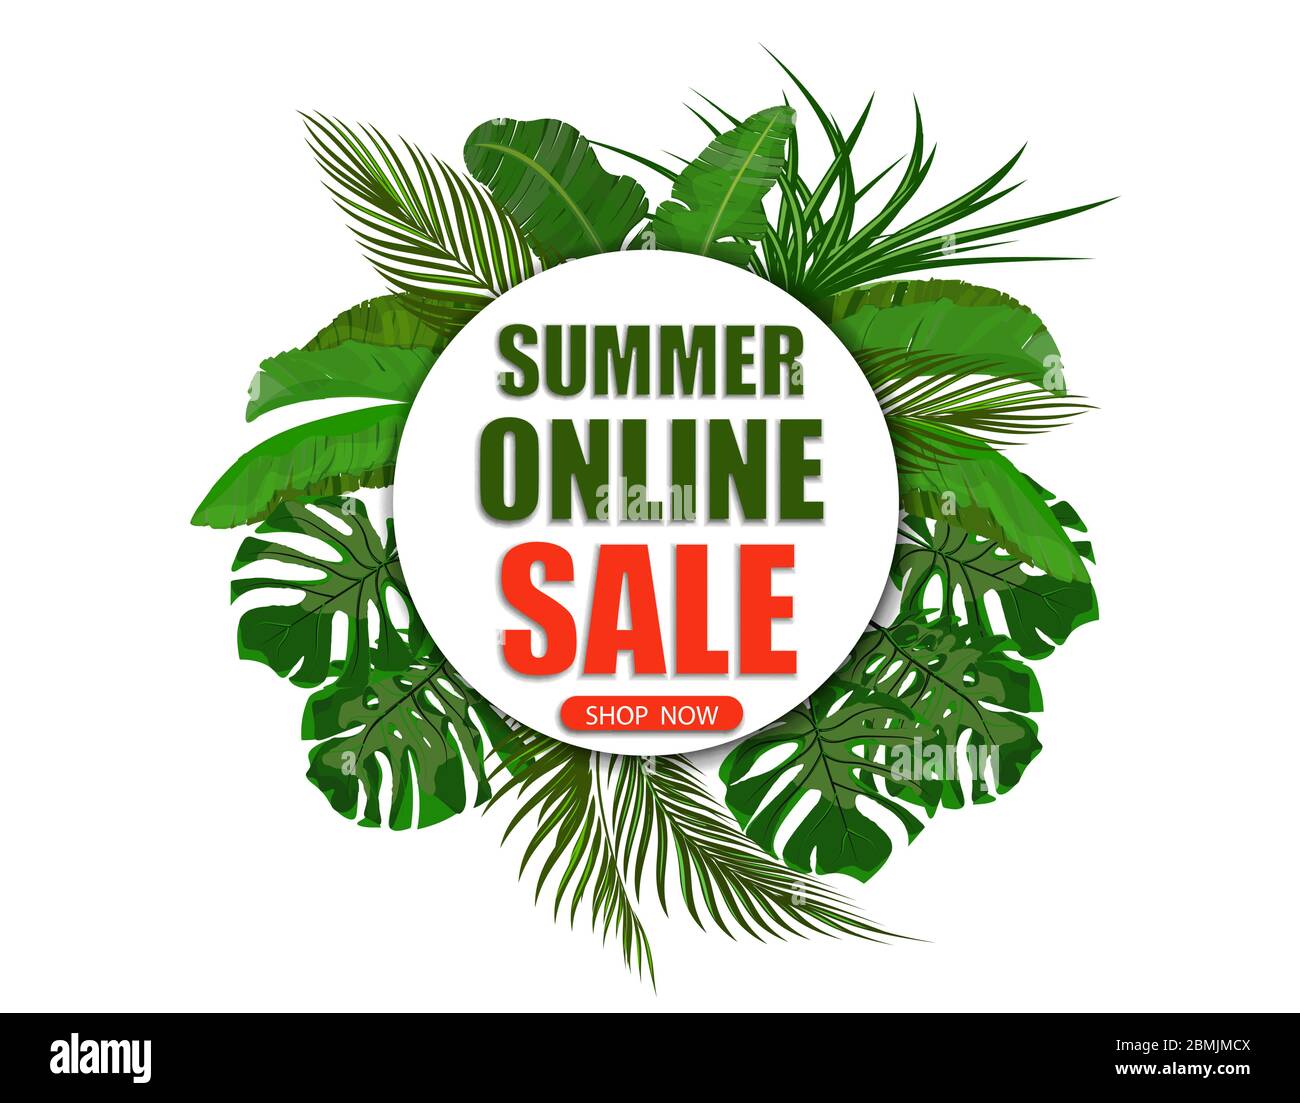 Summer online sale. Shop now. Banner on the background of palm leaves ...